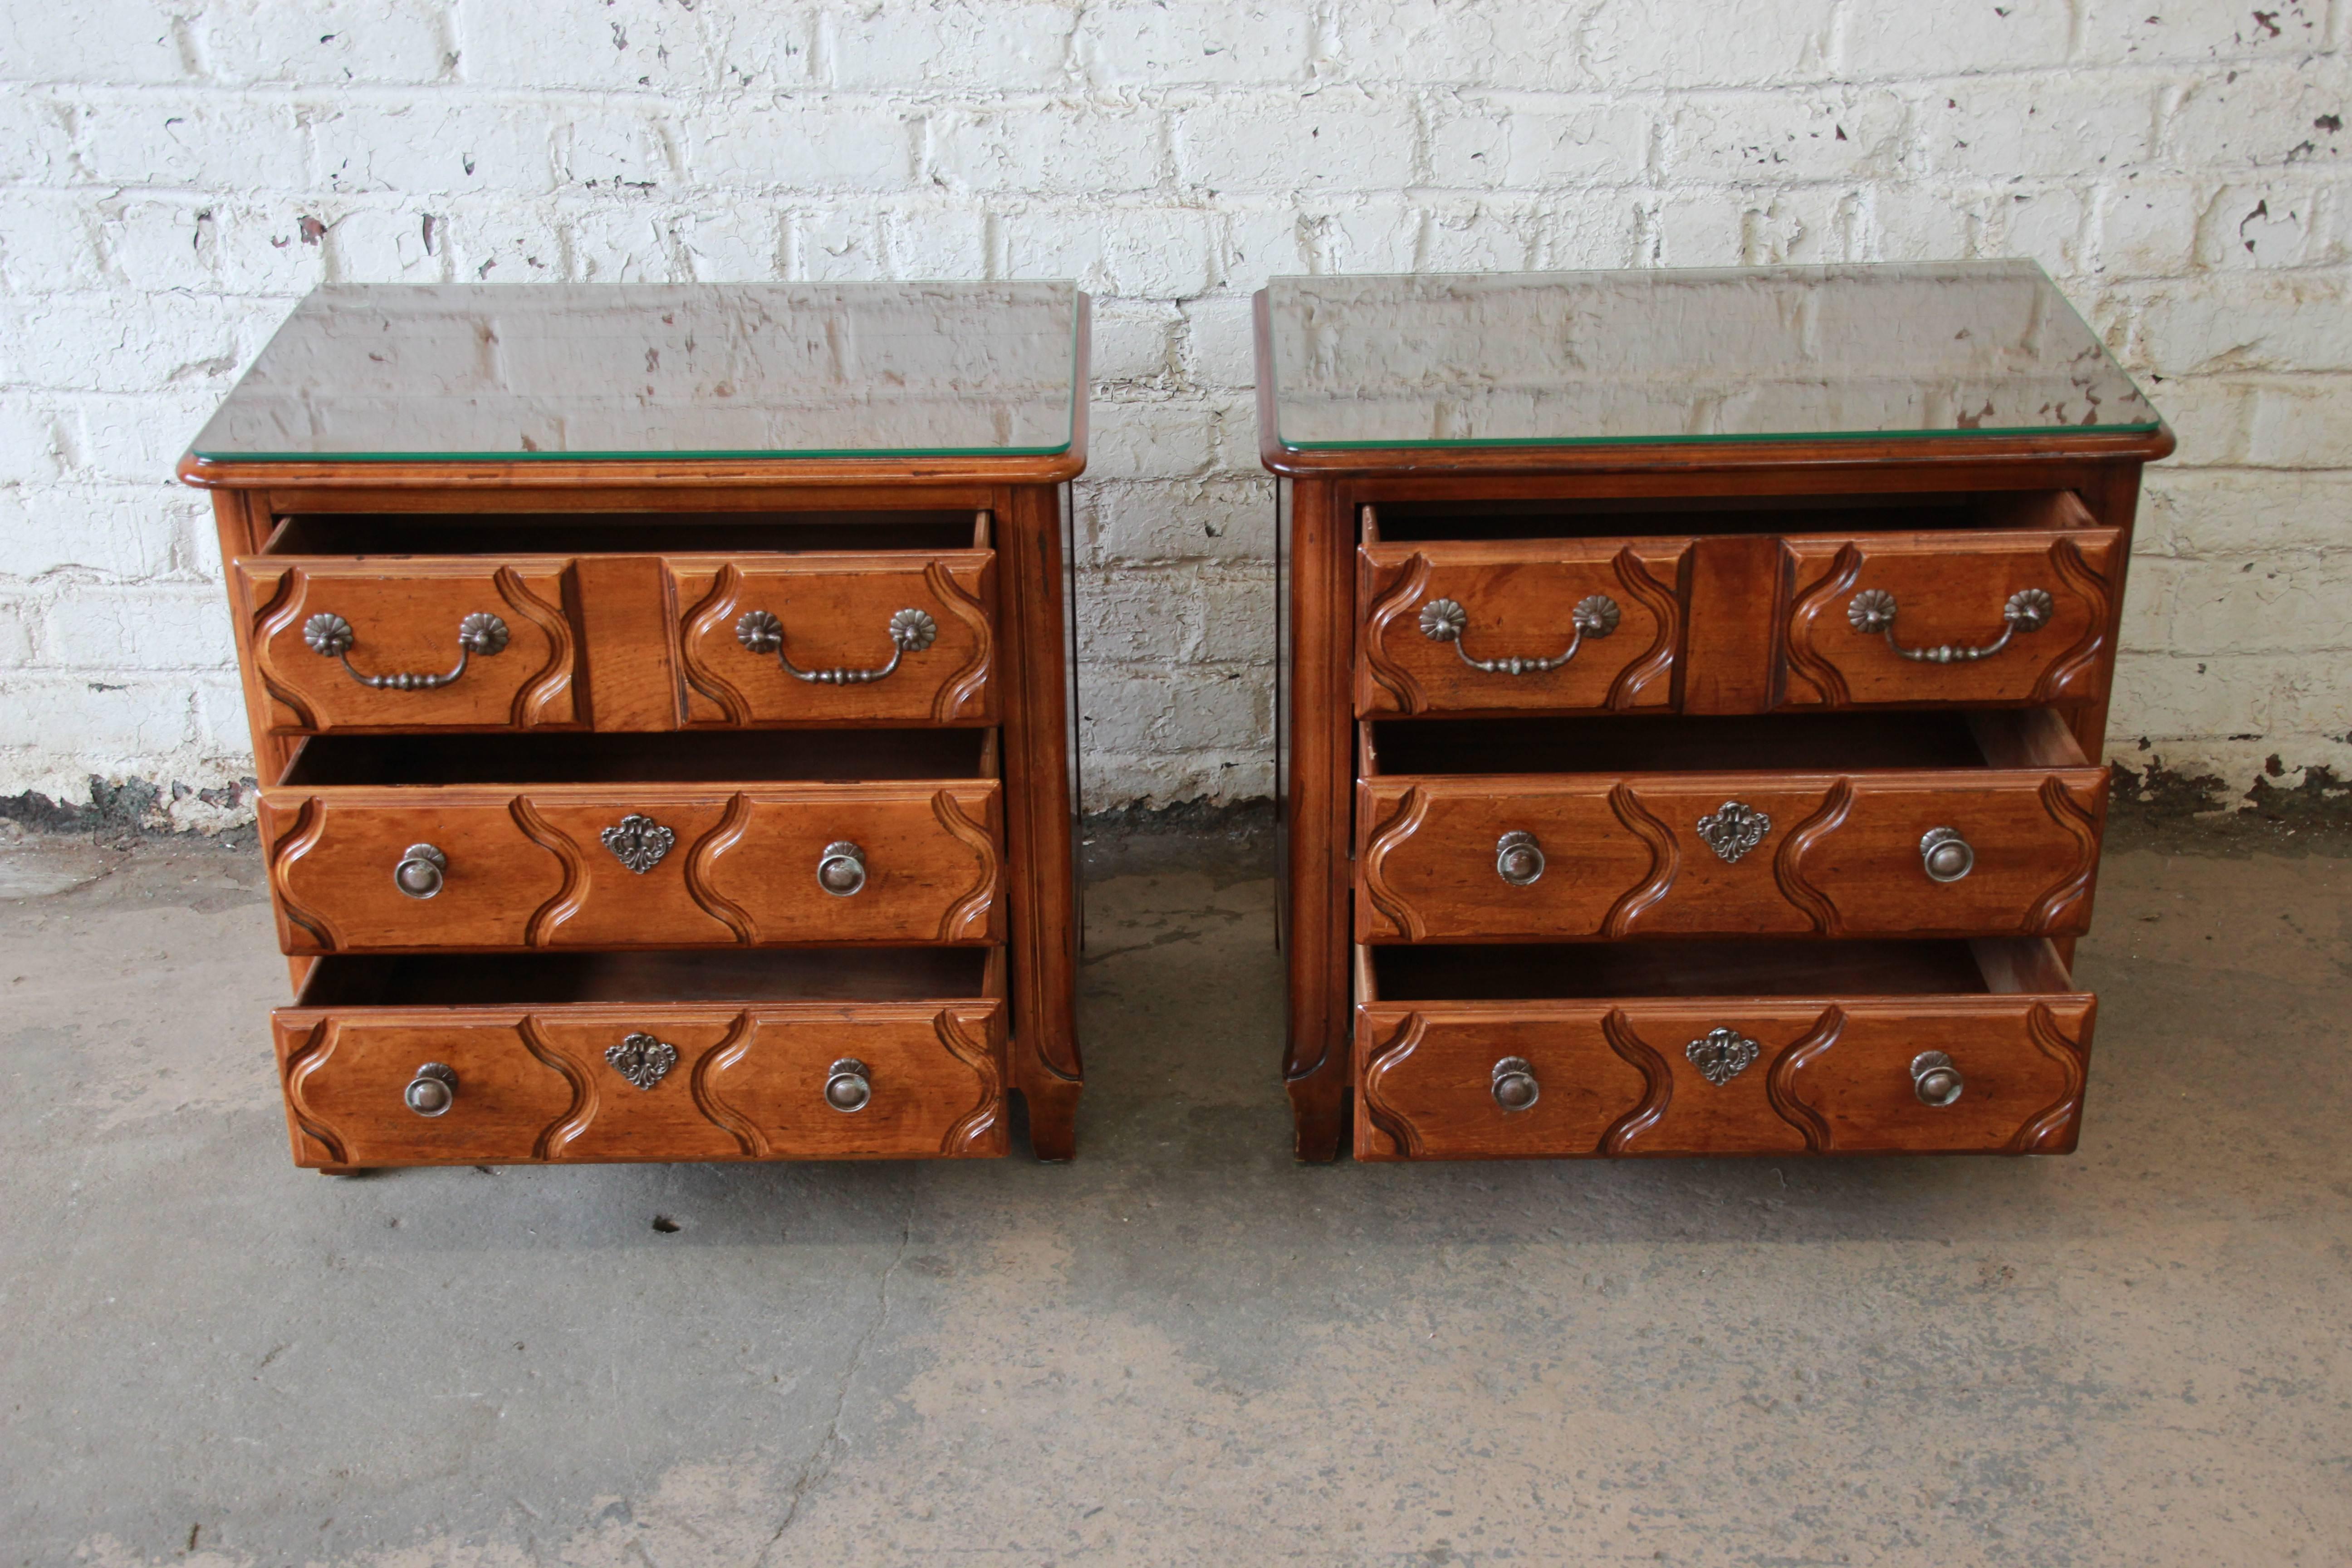 20th Century Pierre Deux French Country Three-Drawer Chests or Nightstands by Henredon, Pair